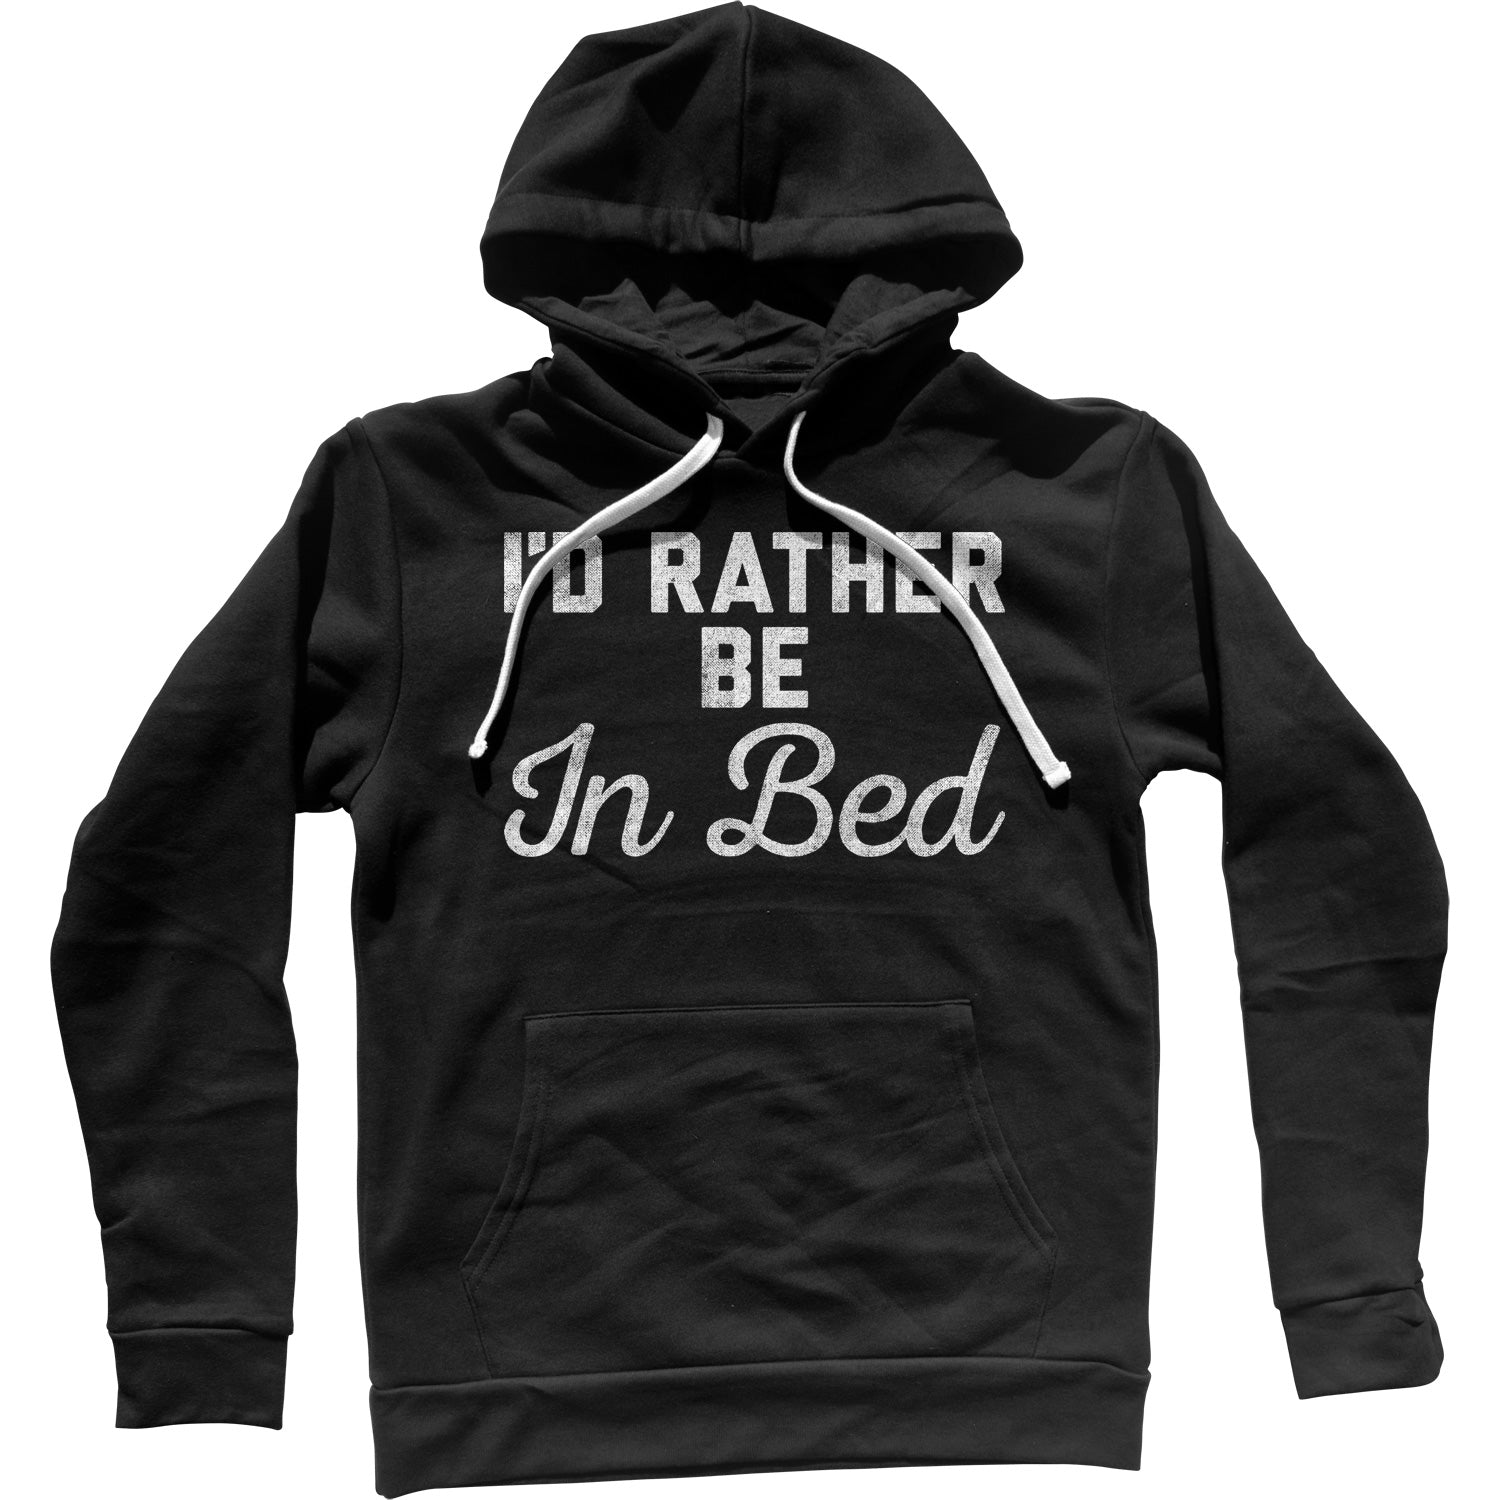 I'd Rather Be in Bed Unisex Hoodie